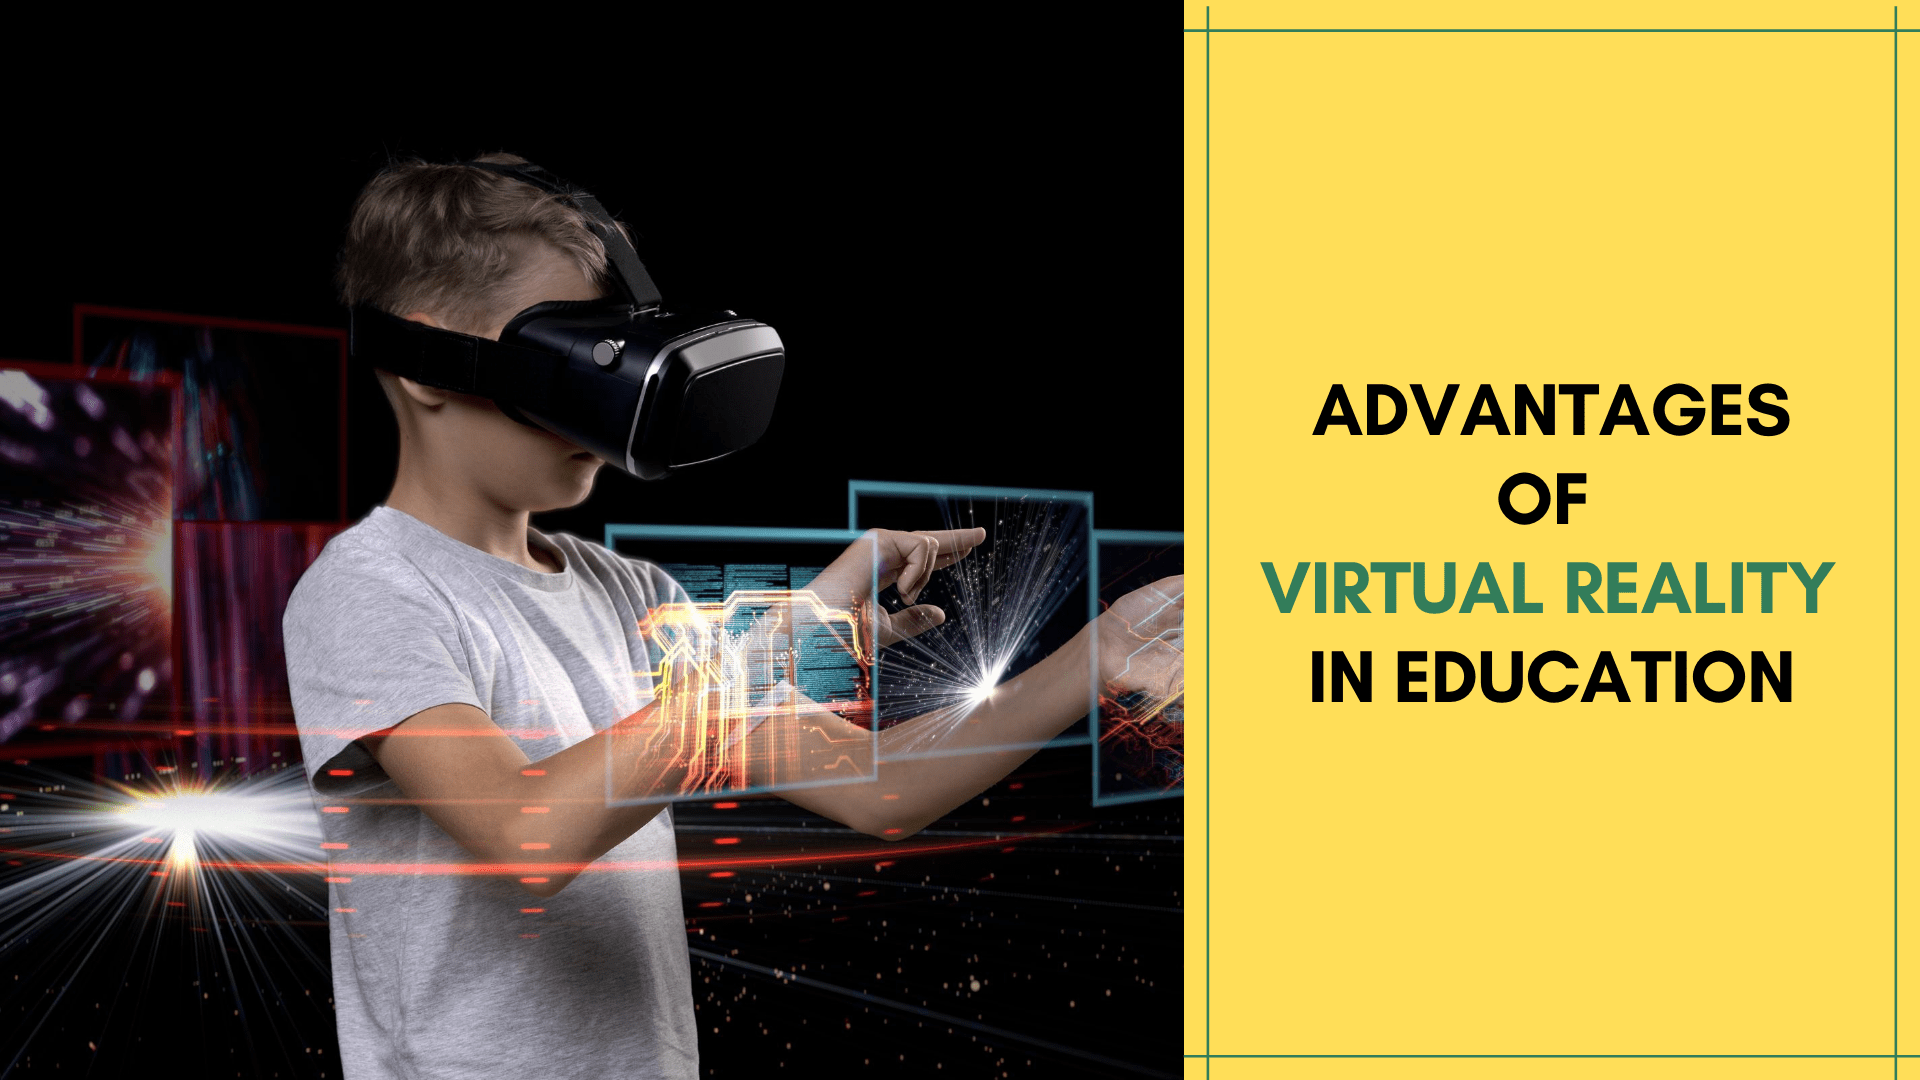 Advantages of Virtual Reality in Education